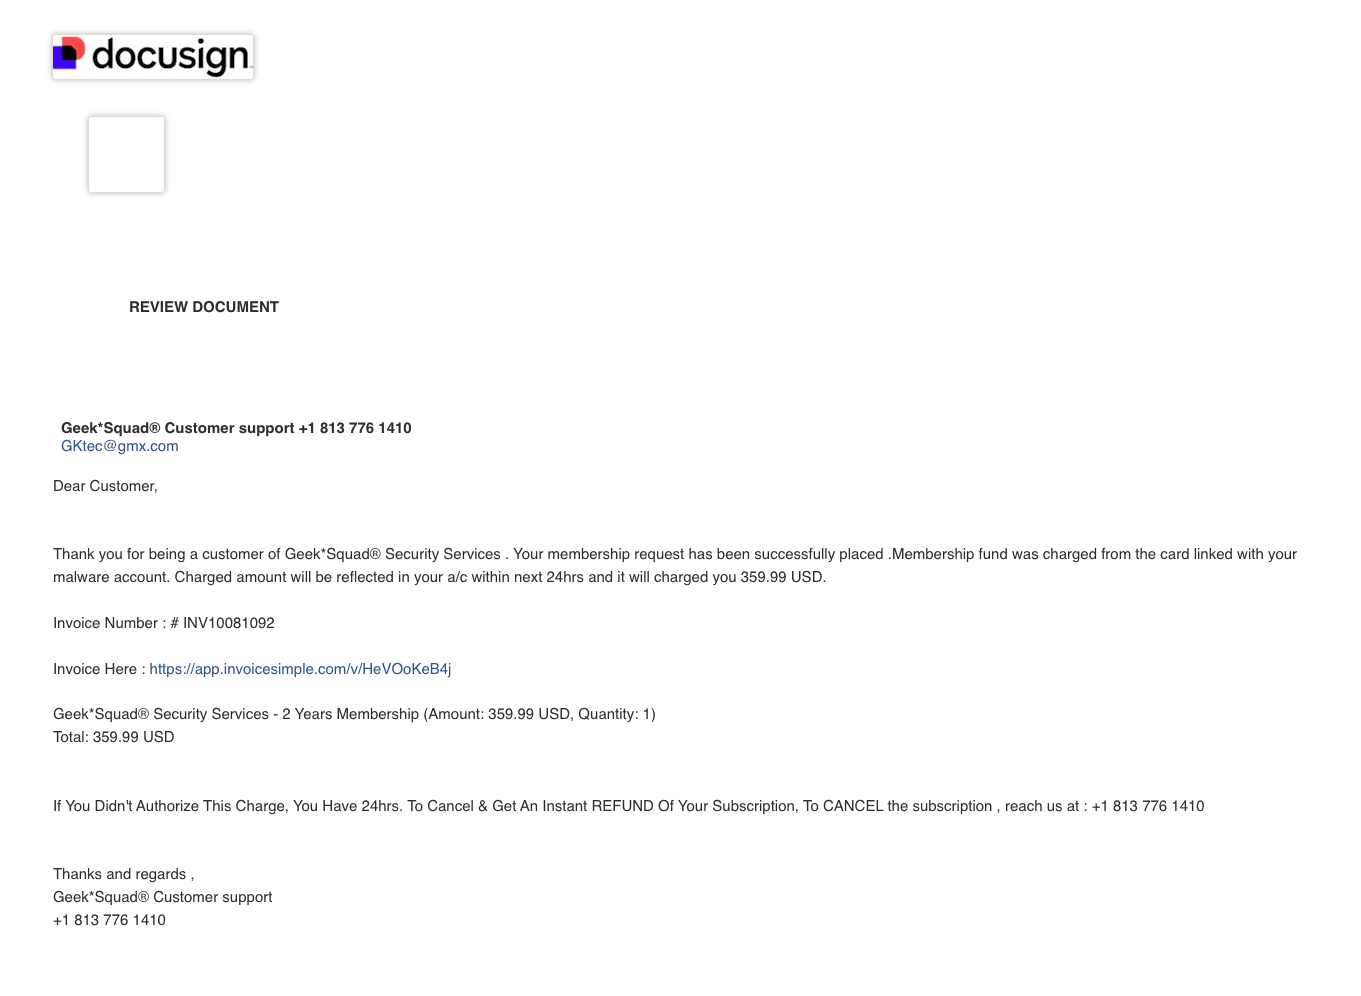 Screenshot that shows a DocuSign email about an invoice from Geek Squad. This is not real.